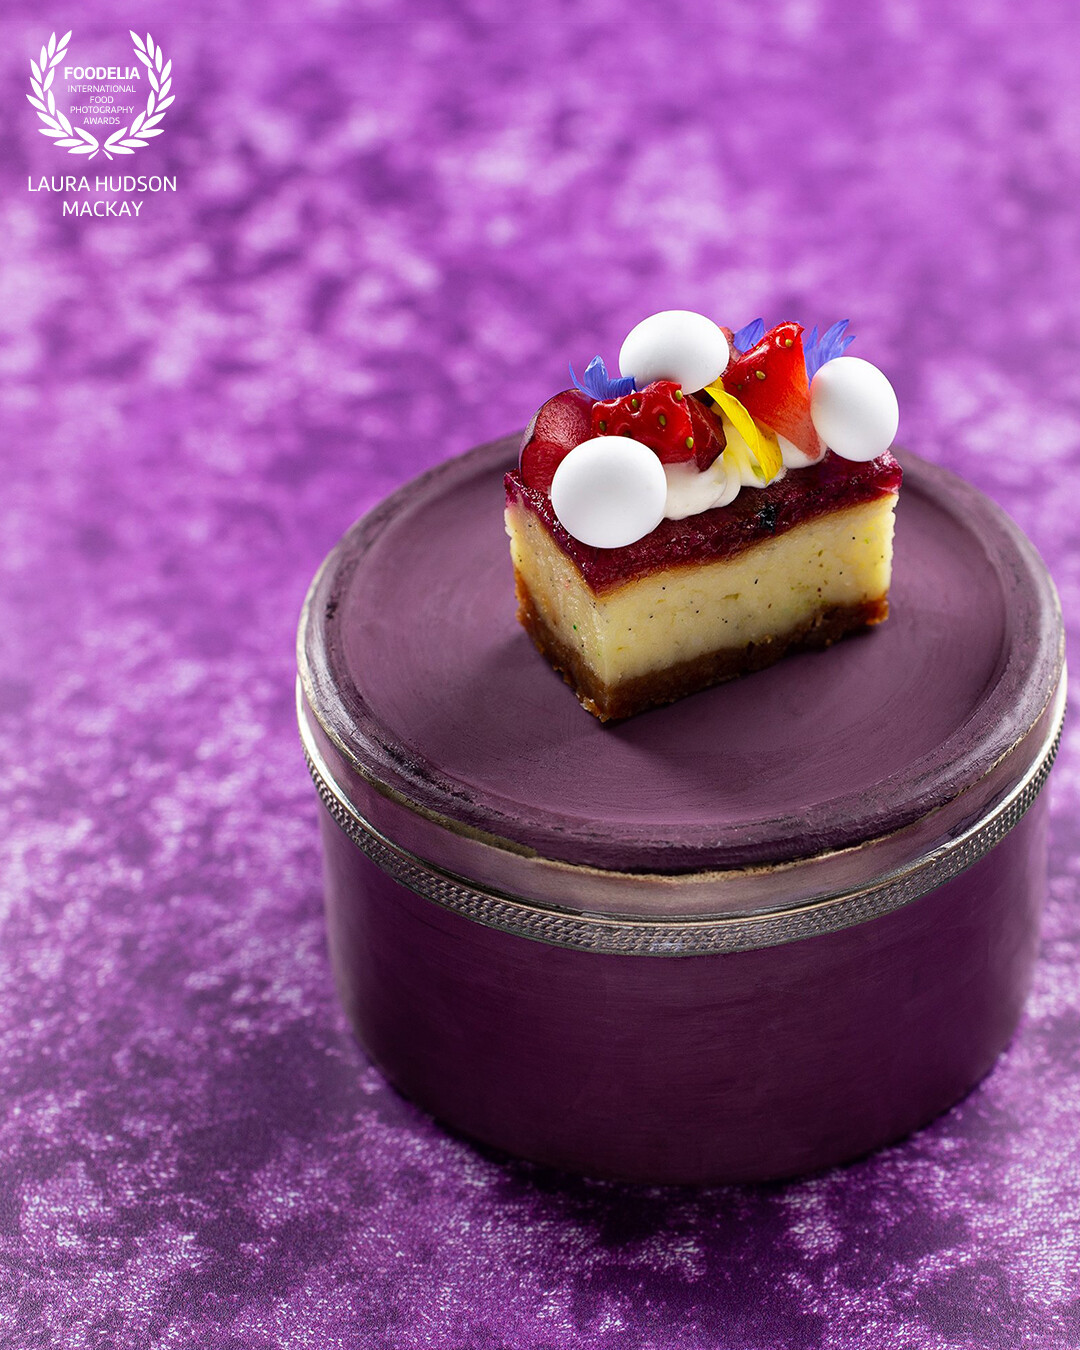 A perfect mixed berry cheesecake with raspberry and calendula.  Sitting on a purple stand, hand crafted from lime plaster, which serves as a pedestal for this small marvel. Collaboration with Scottish chef, Fraser Cameron. Together we combine artistry, flavour and vision.